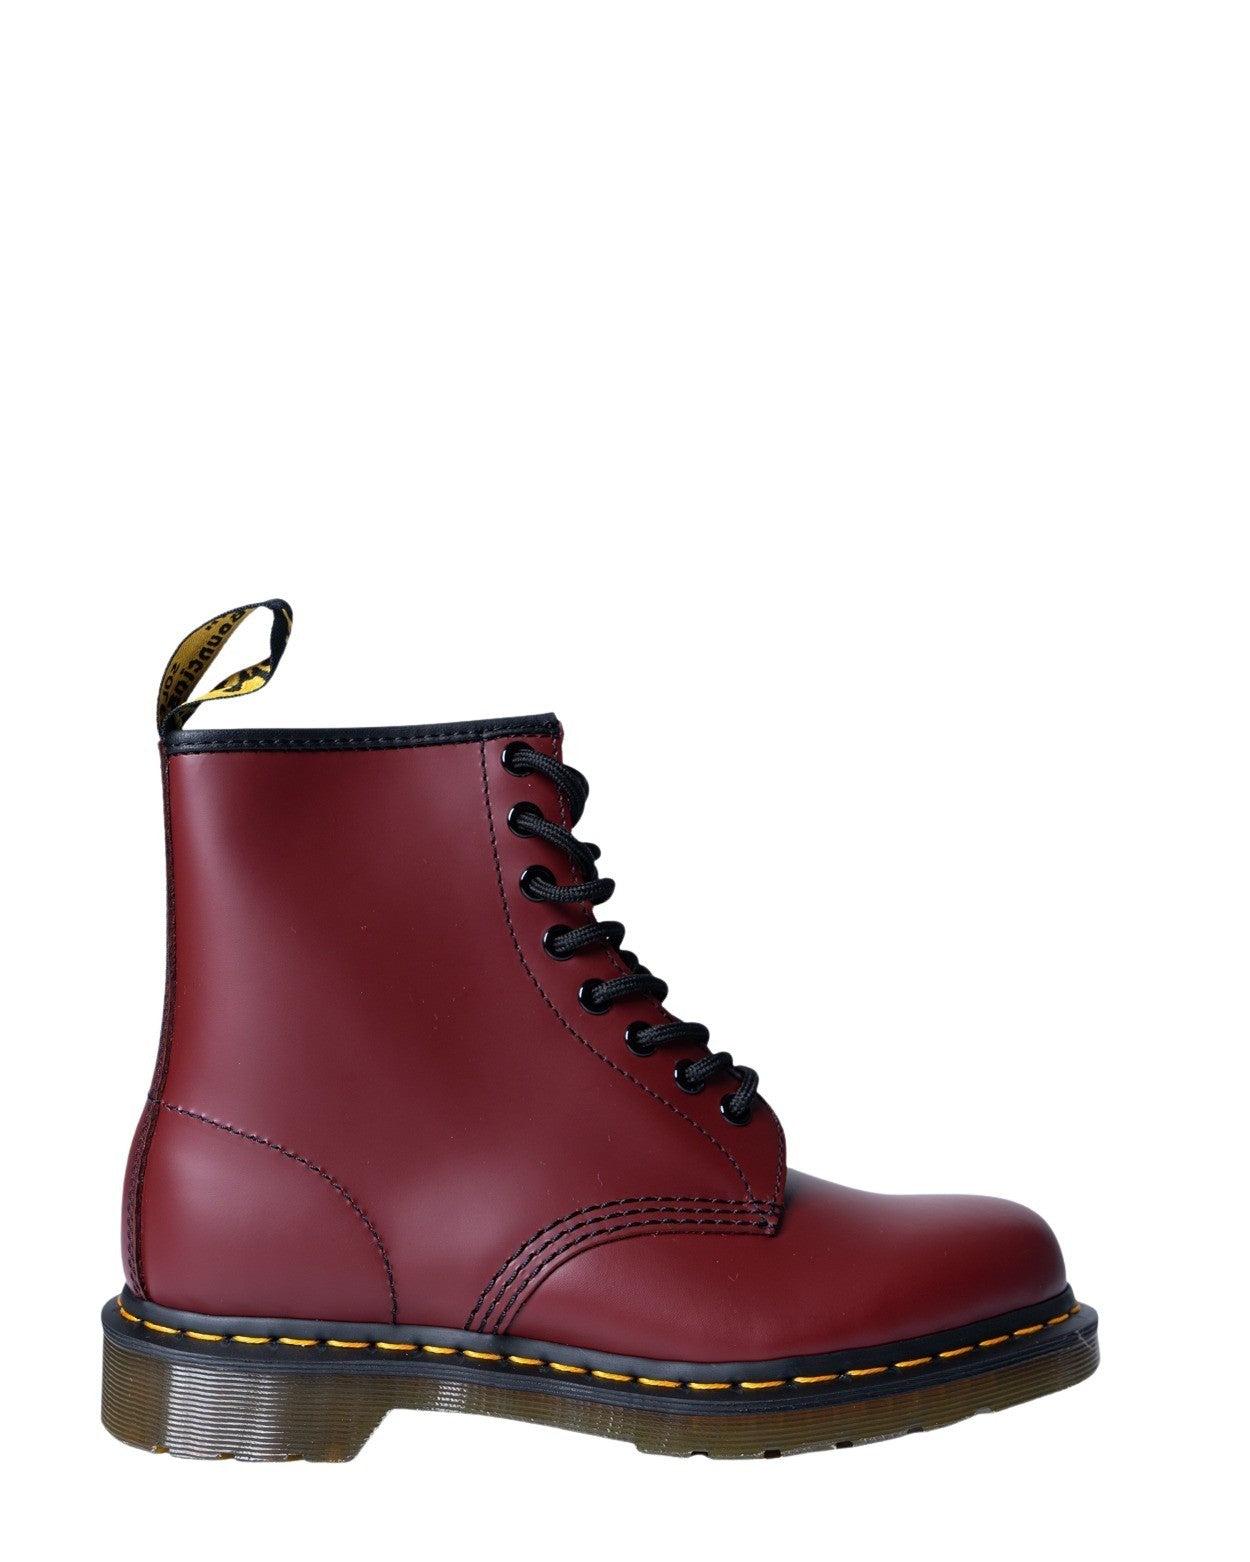 Dr. Martens Rubber Boots in Bordeaux (Red) | Lyst